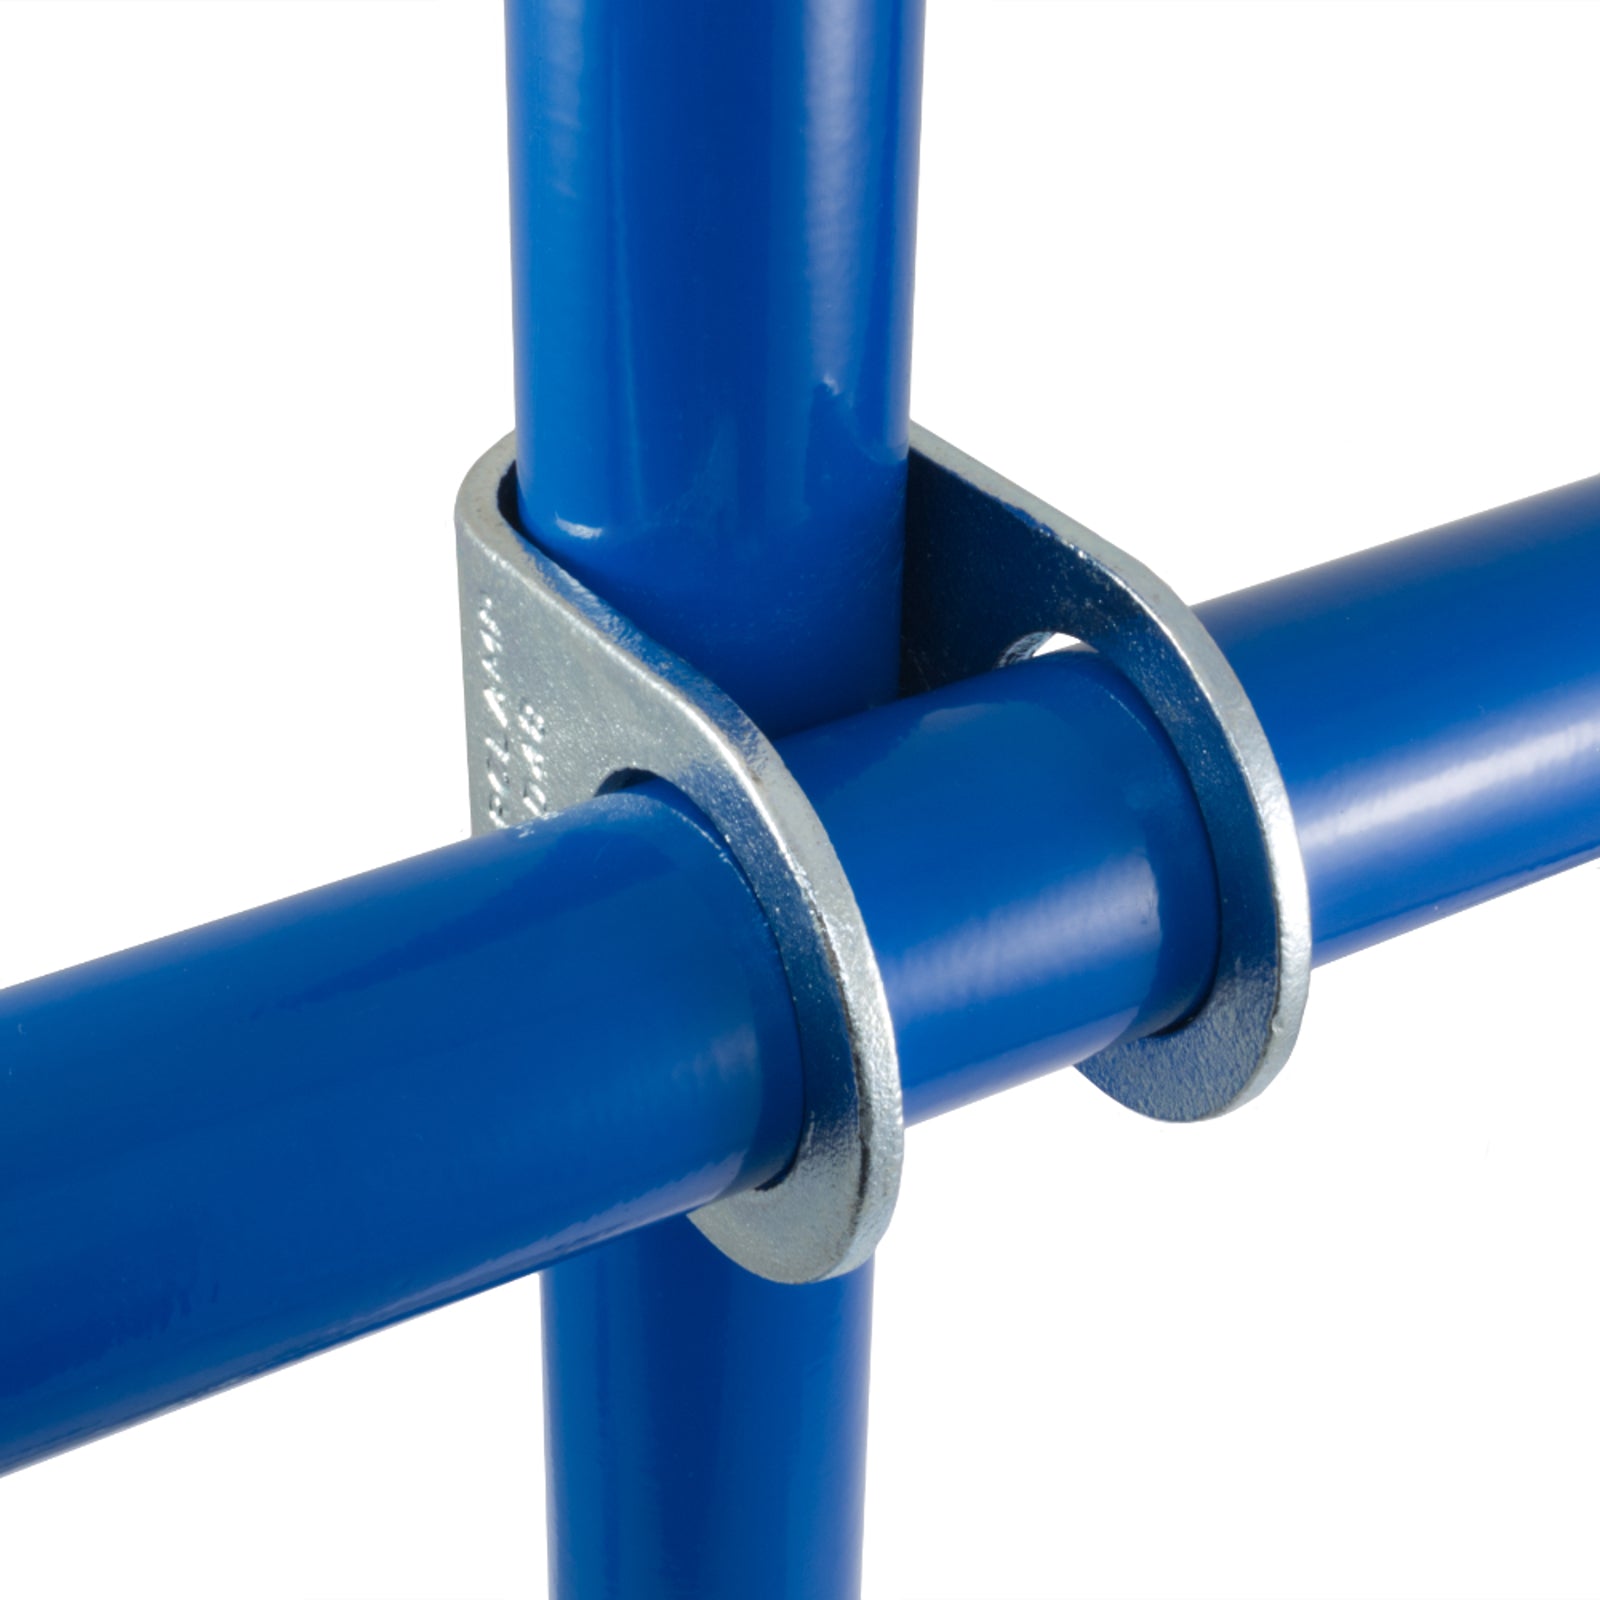 Clamp-on Crossover by Interclamp, Code 160. Shop rail, pipe and fence fittings online chain.com.au. Australia wide shipping.